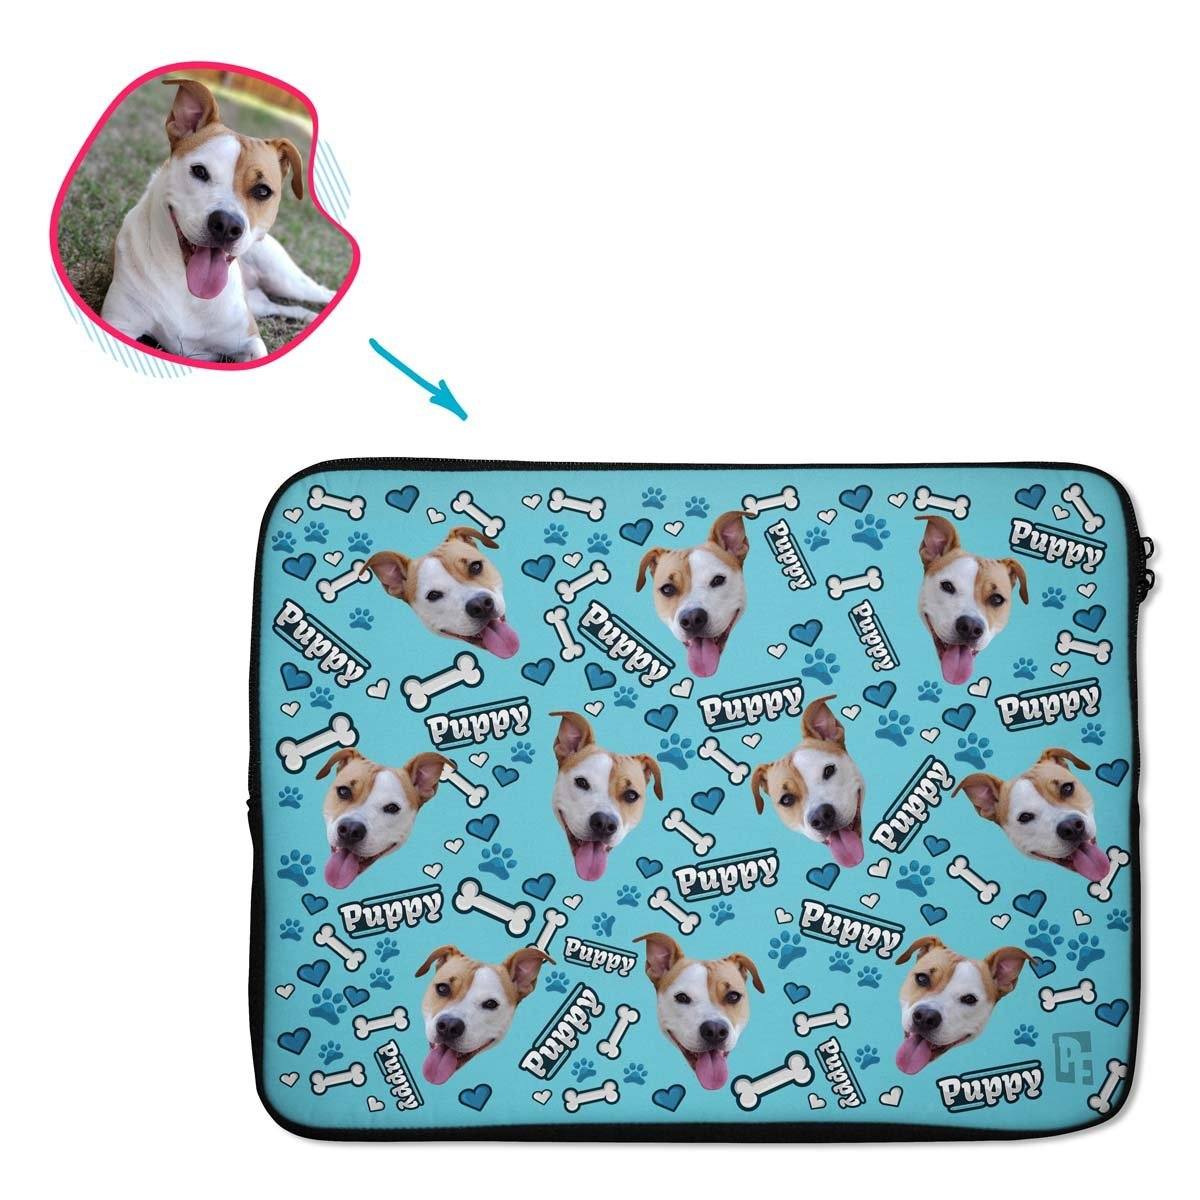 blue Puppy laptop sleeve personalized with photo of face printed on them